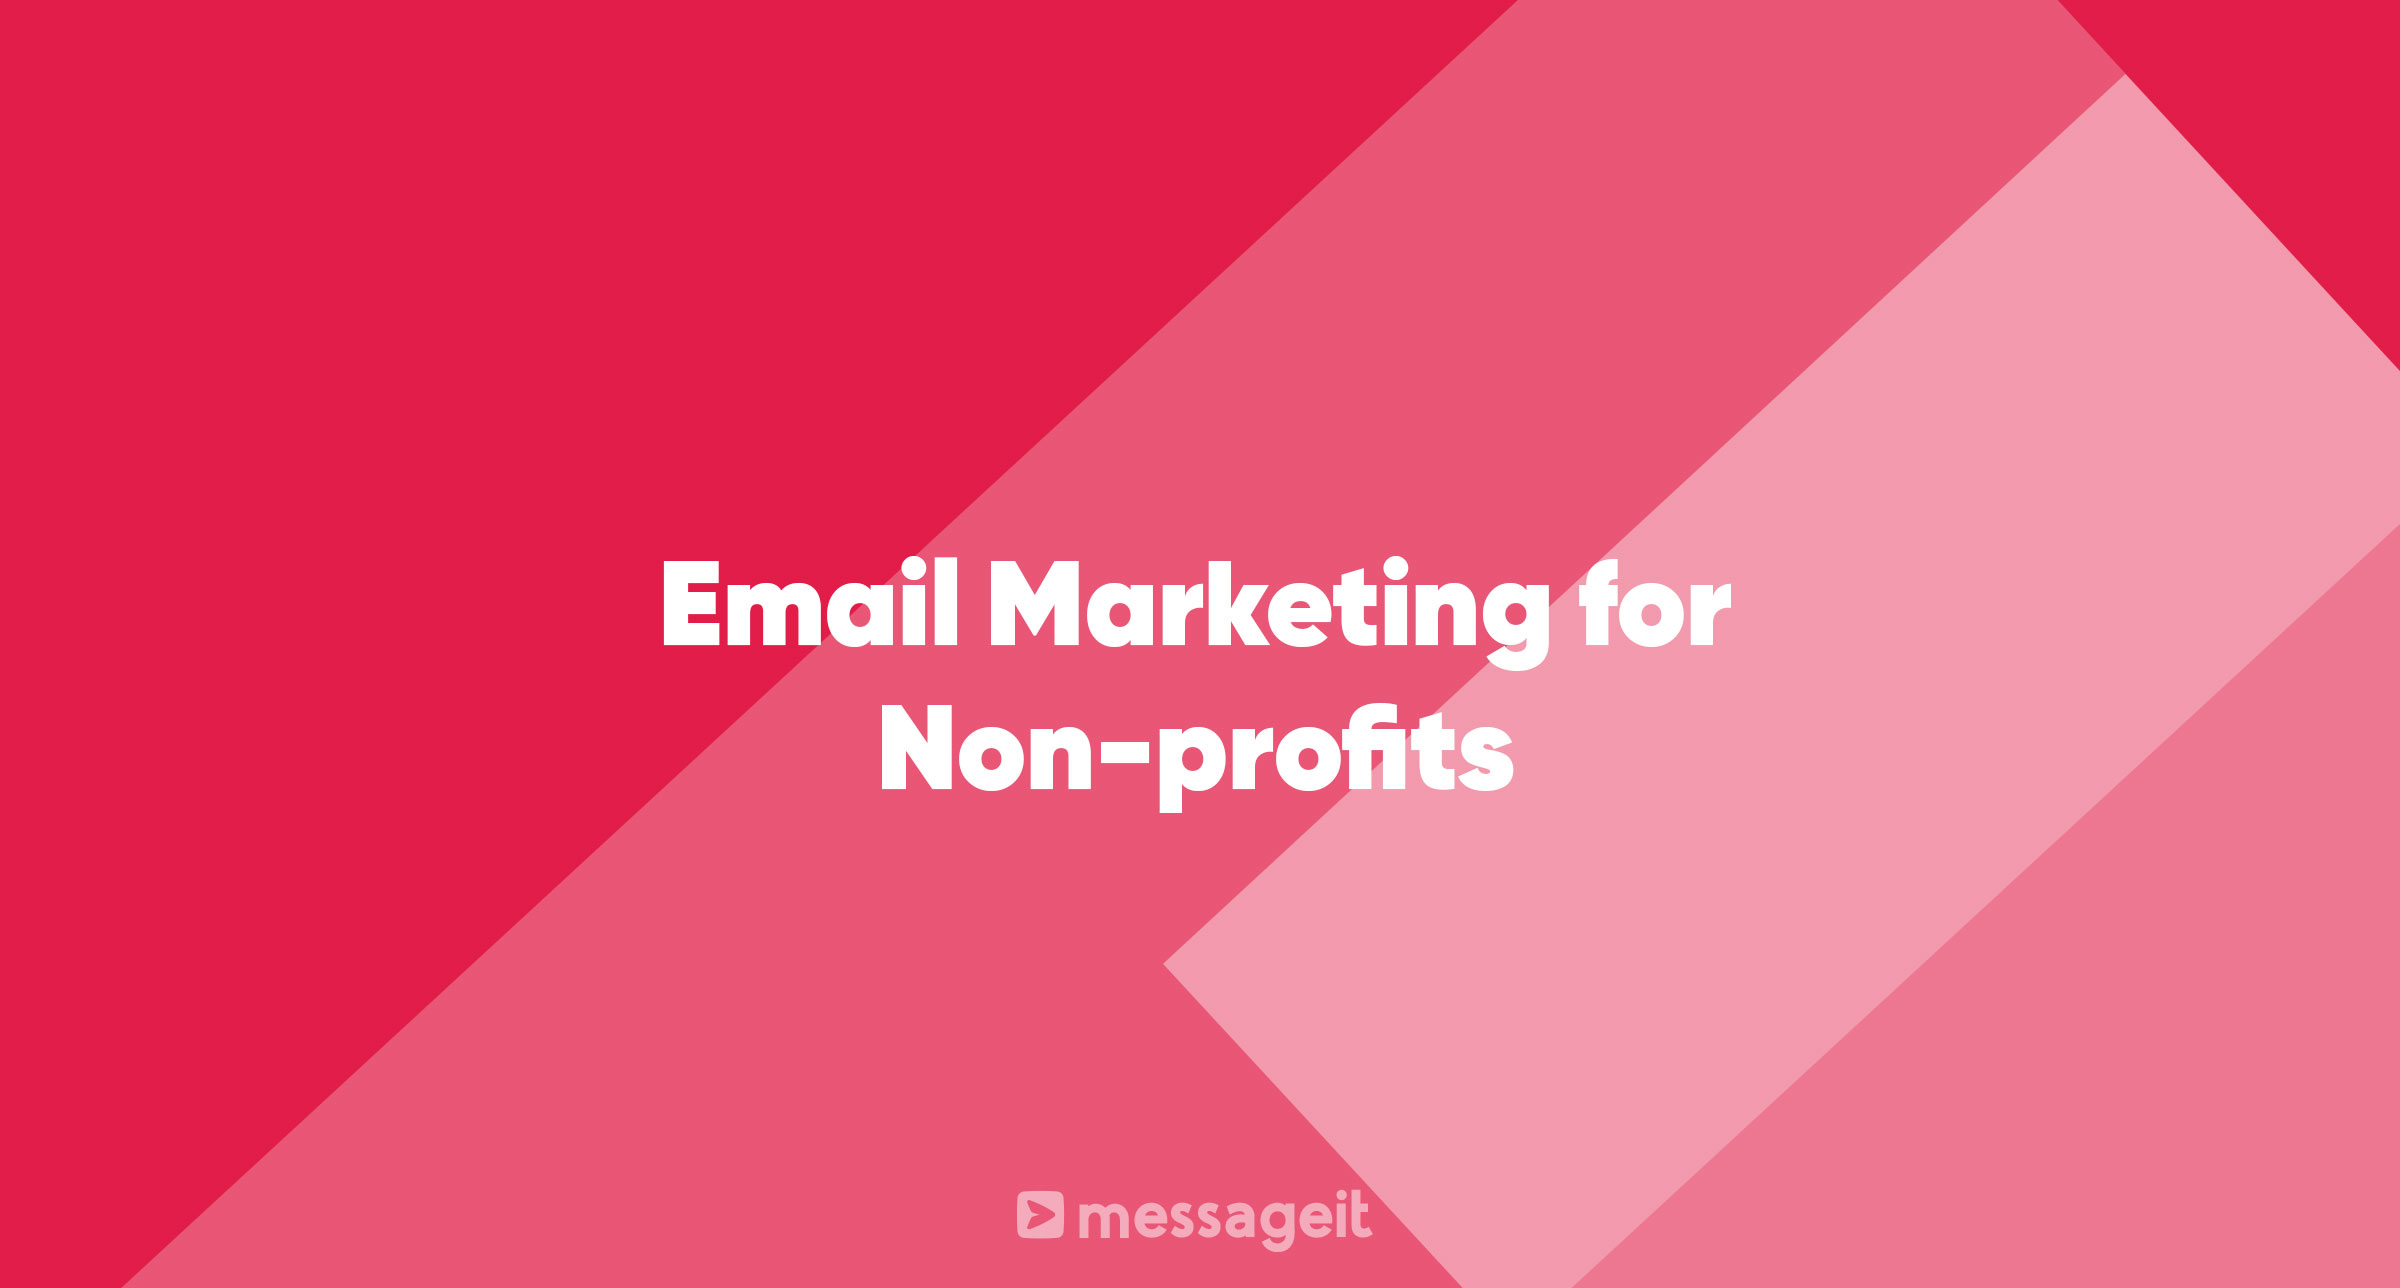 Article | Email Marketing for Non-profits